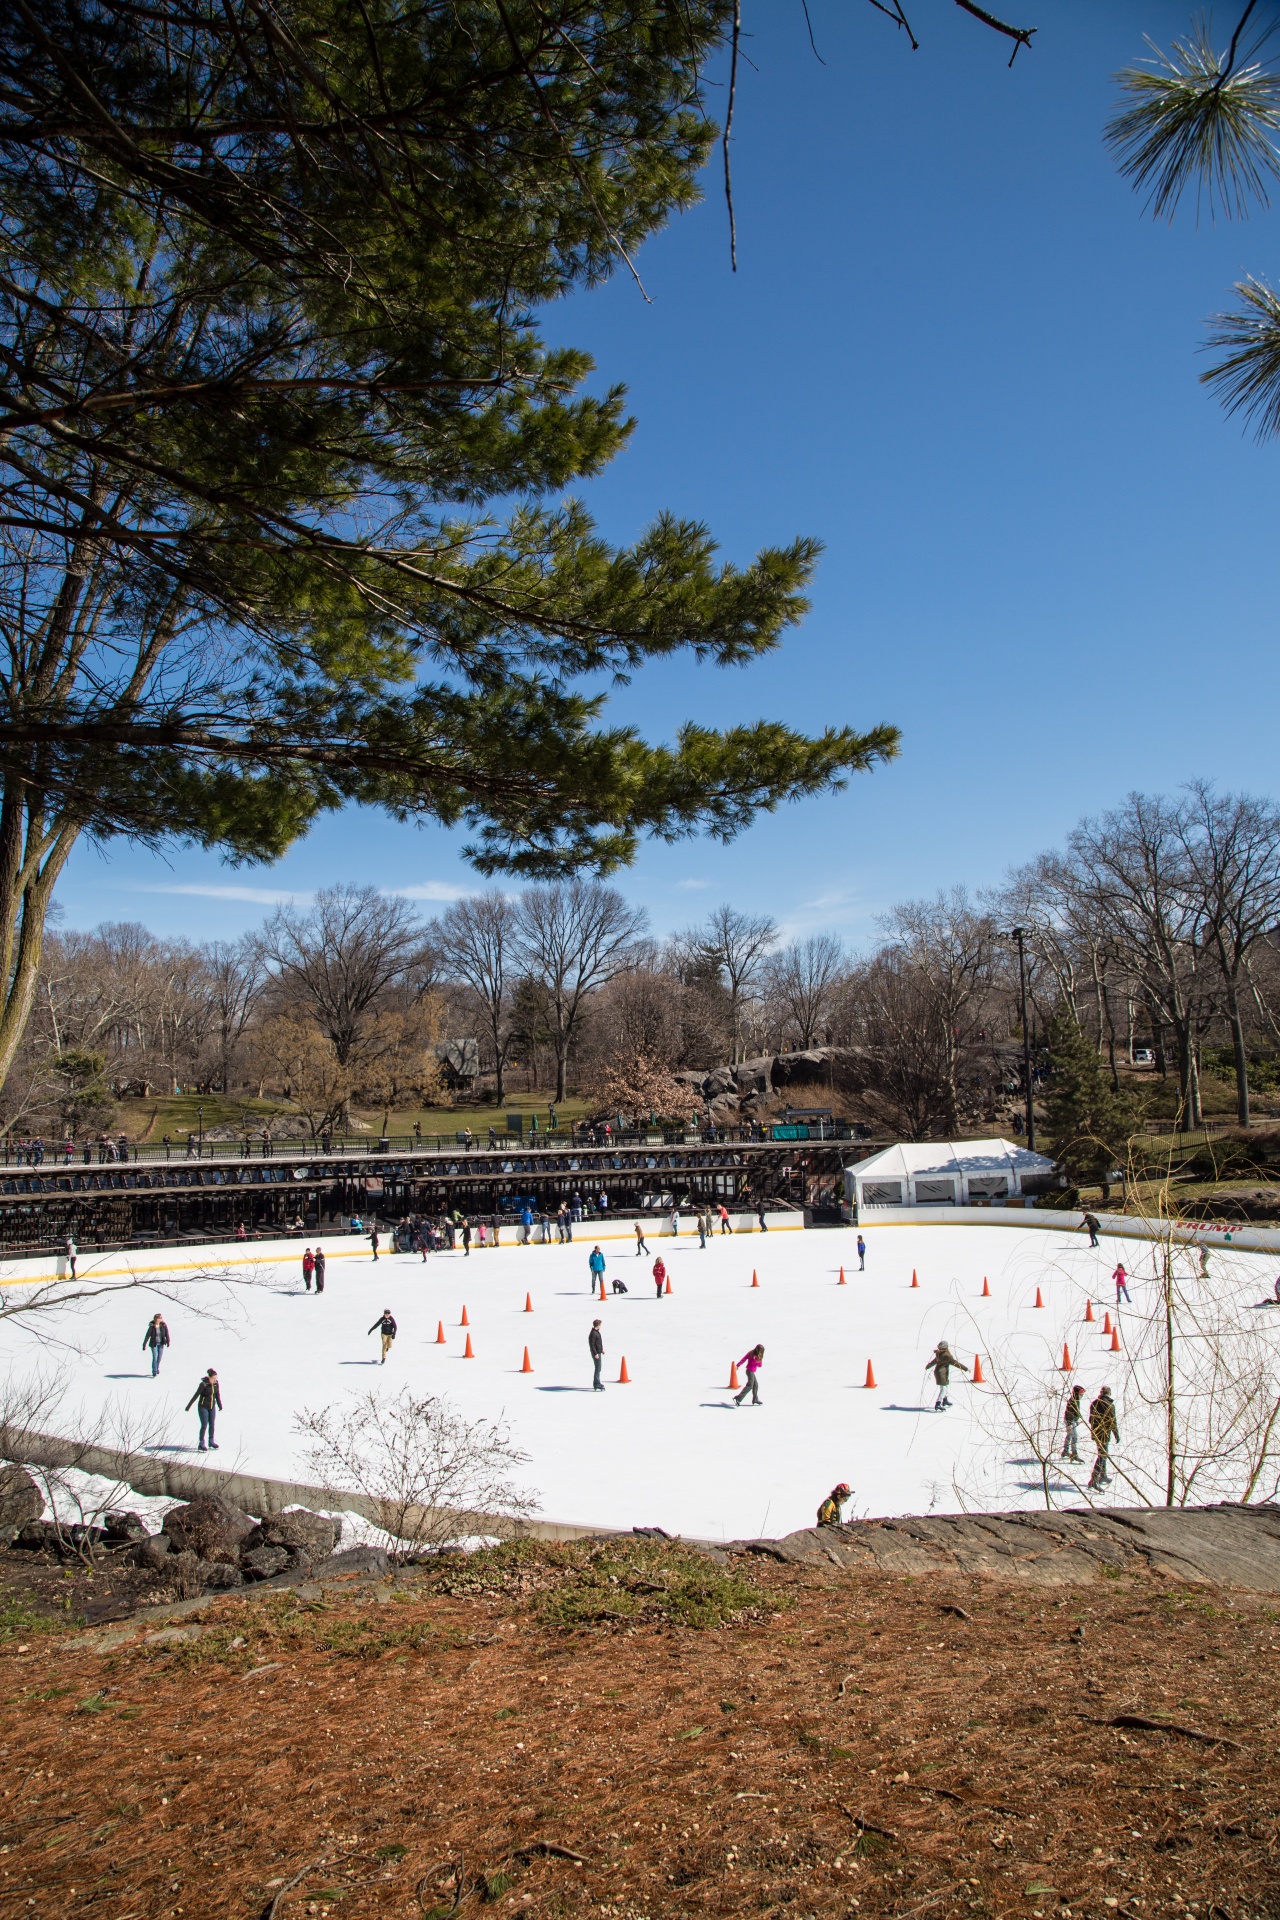 New York's famous Wollman Ice Rink in Central Park is operated by the Trump organization and opened in 1949, November 13th, 2011.